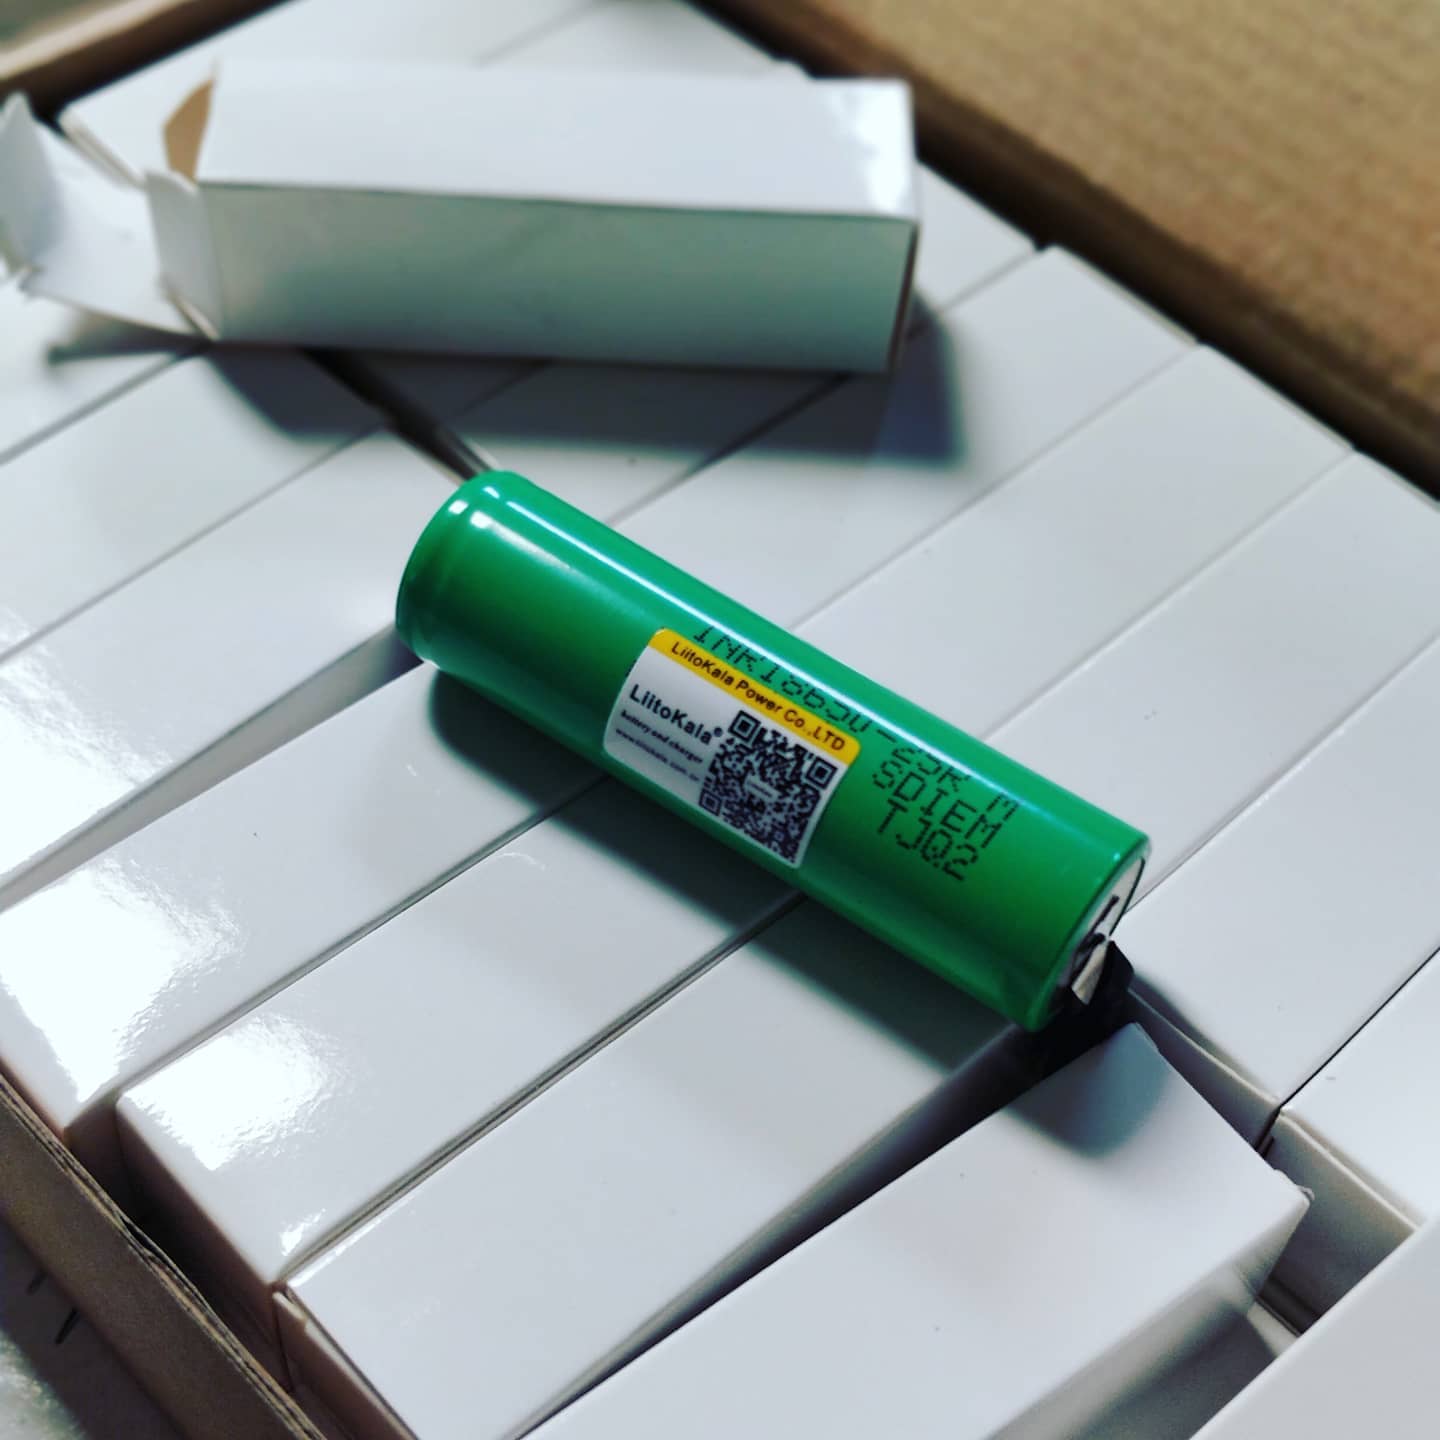 40 pack of lithium ion cells for various projects